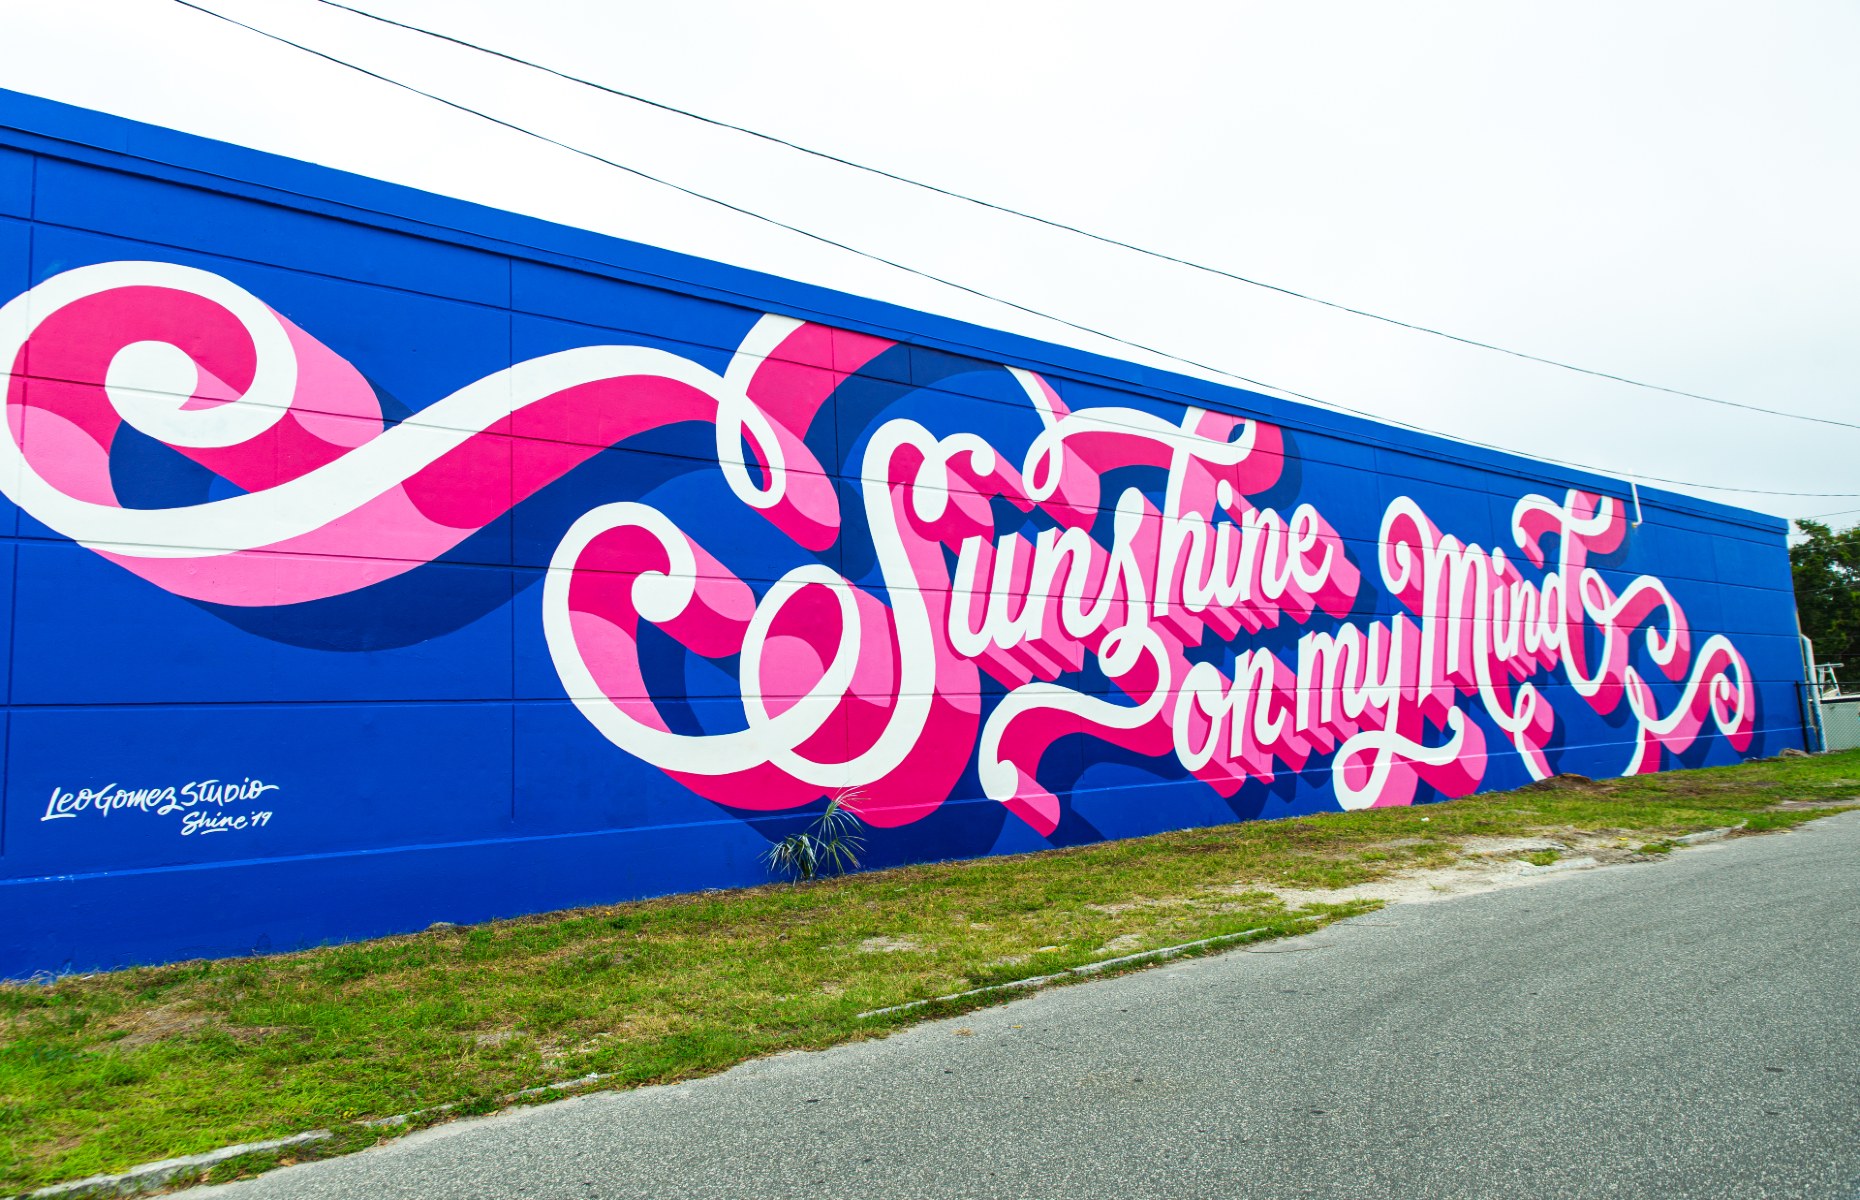 Sunshine on my mind mural in St Pete (Image: Courtesy of VisitStPeteClearwater.com)